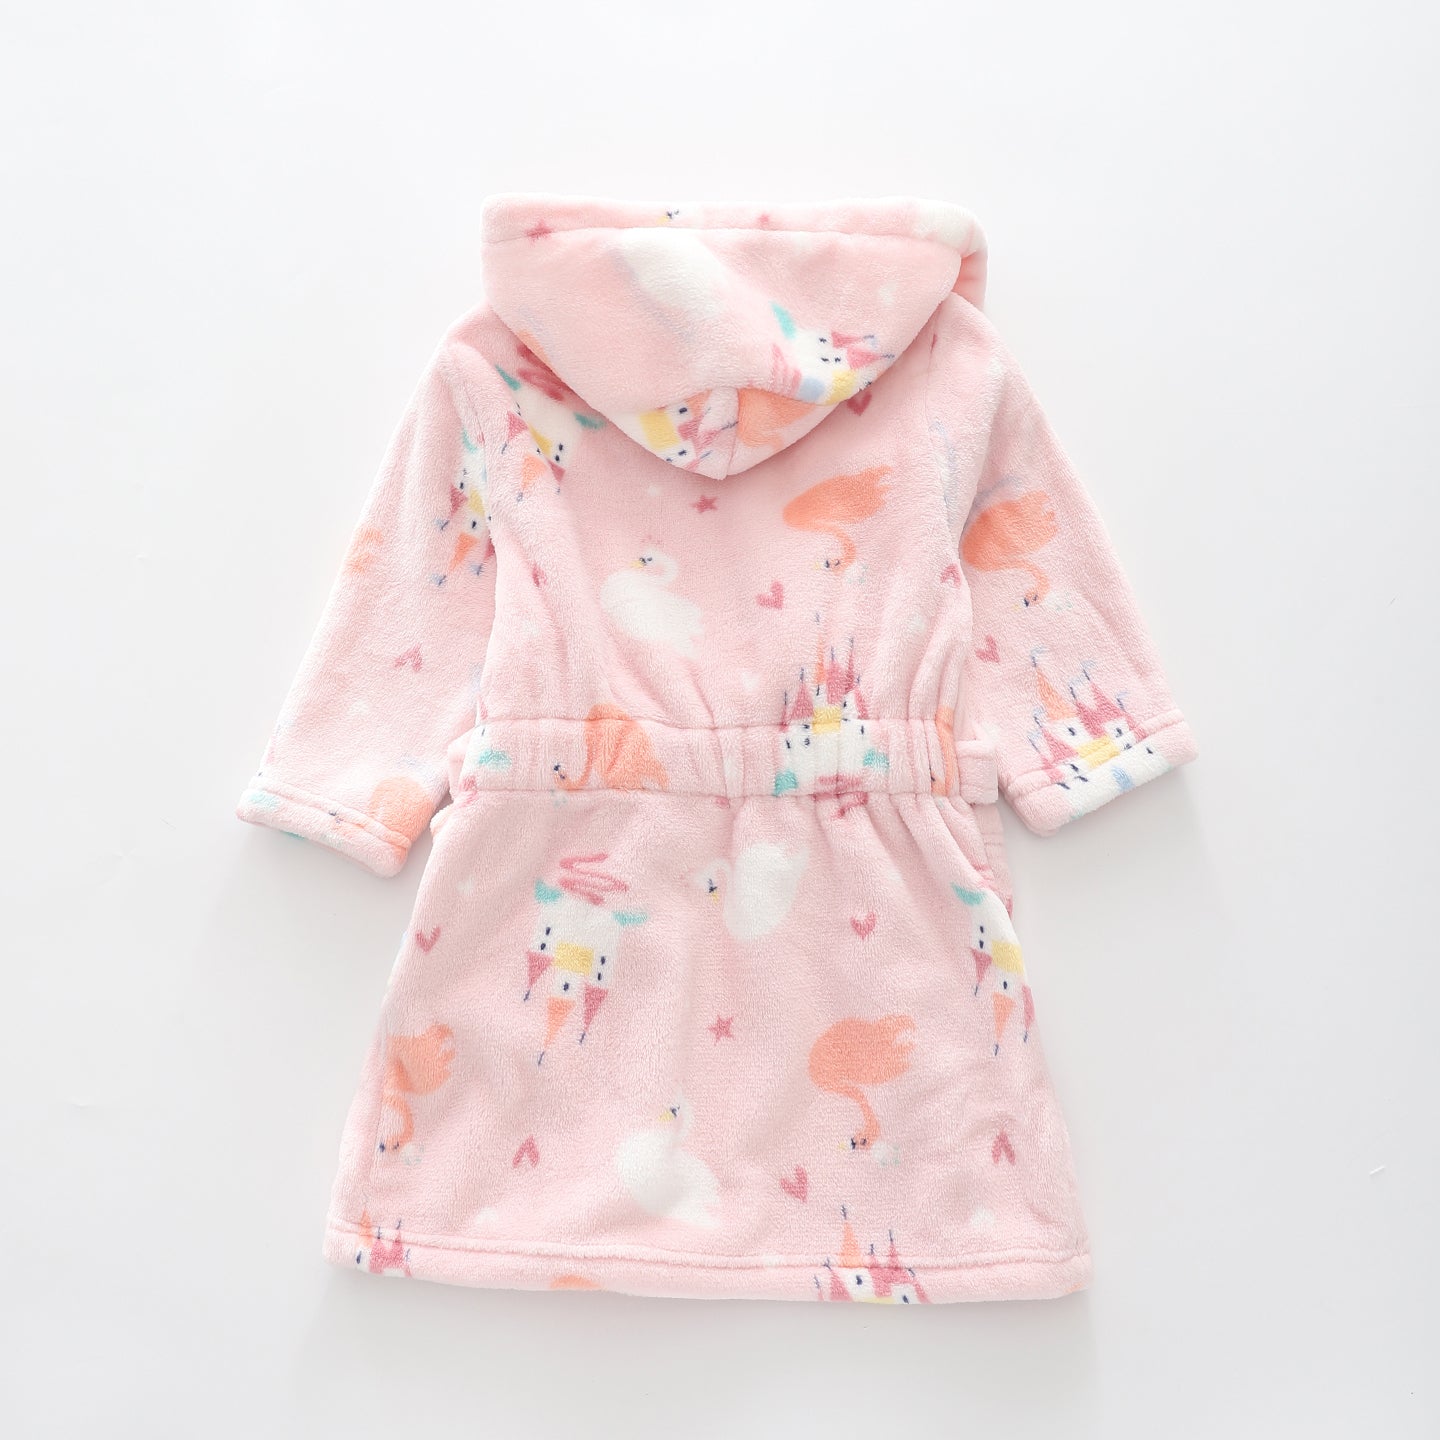 Buy EIO® Soft Baby Boys Girls Dressing Gown Bath Robe (Pink, 5-6 years)  Online at Low Prices in India - Amazon.in